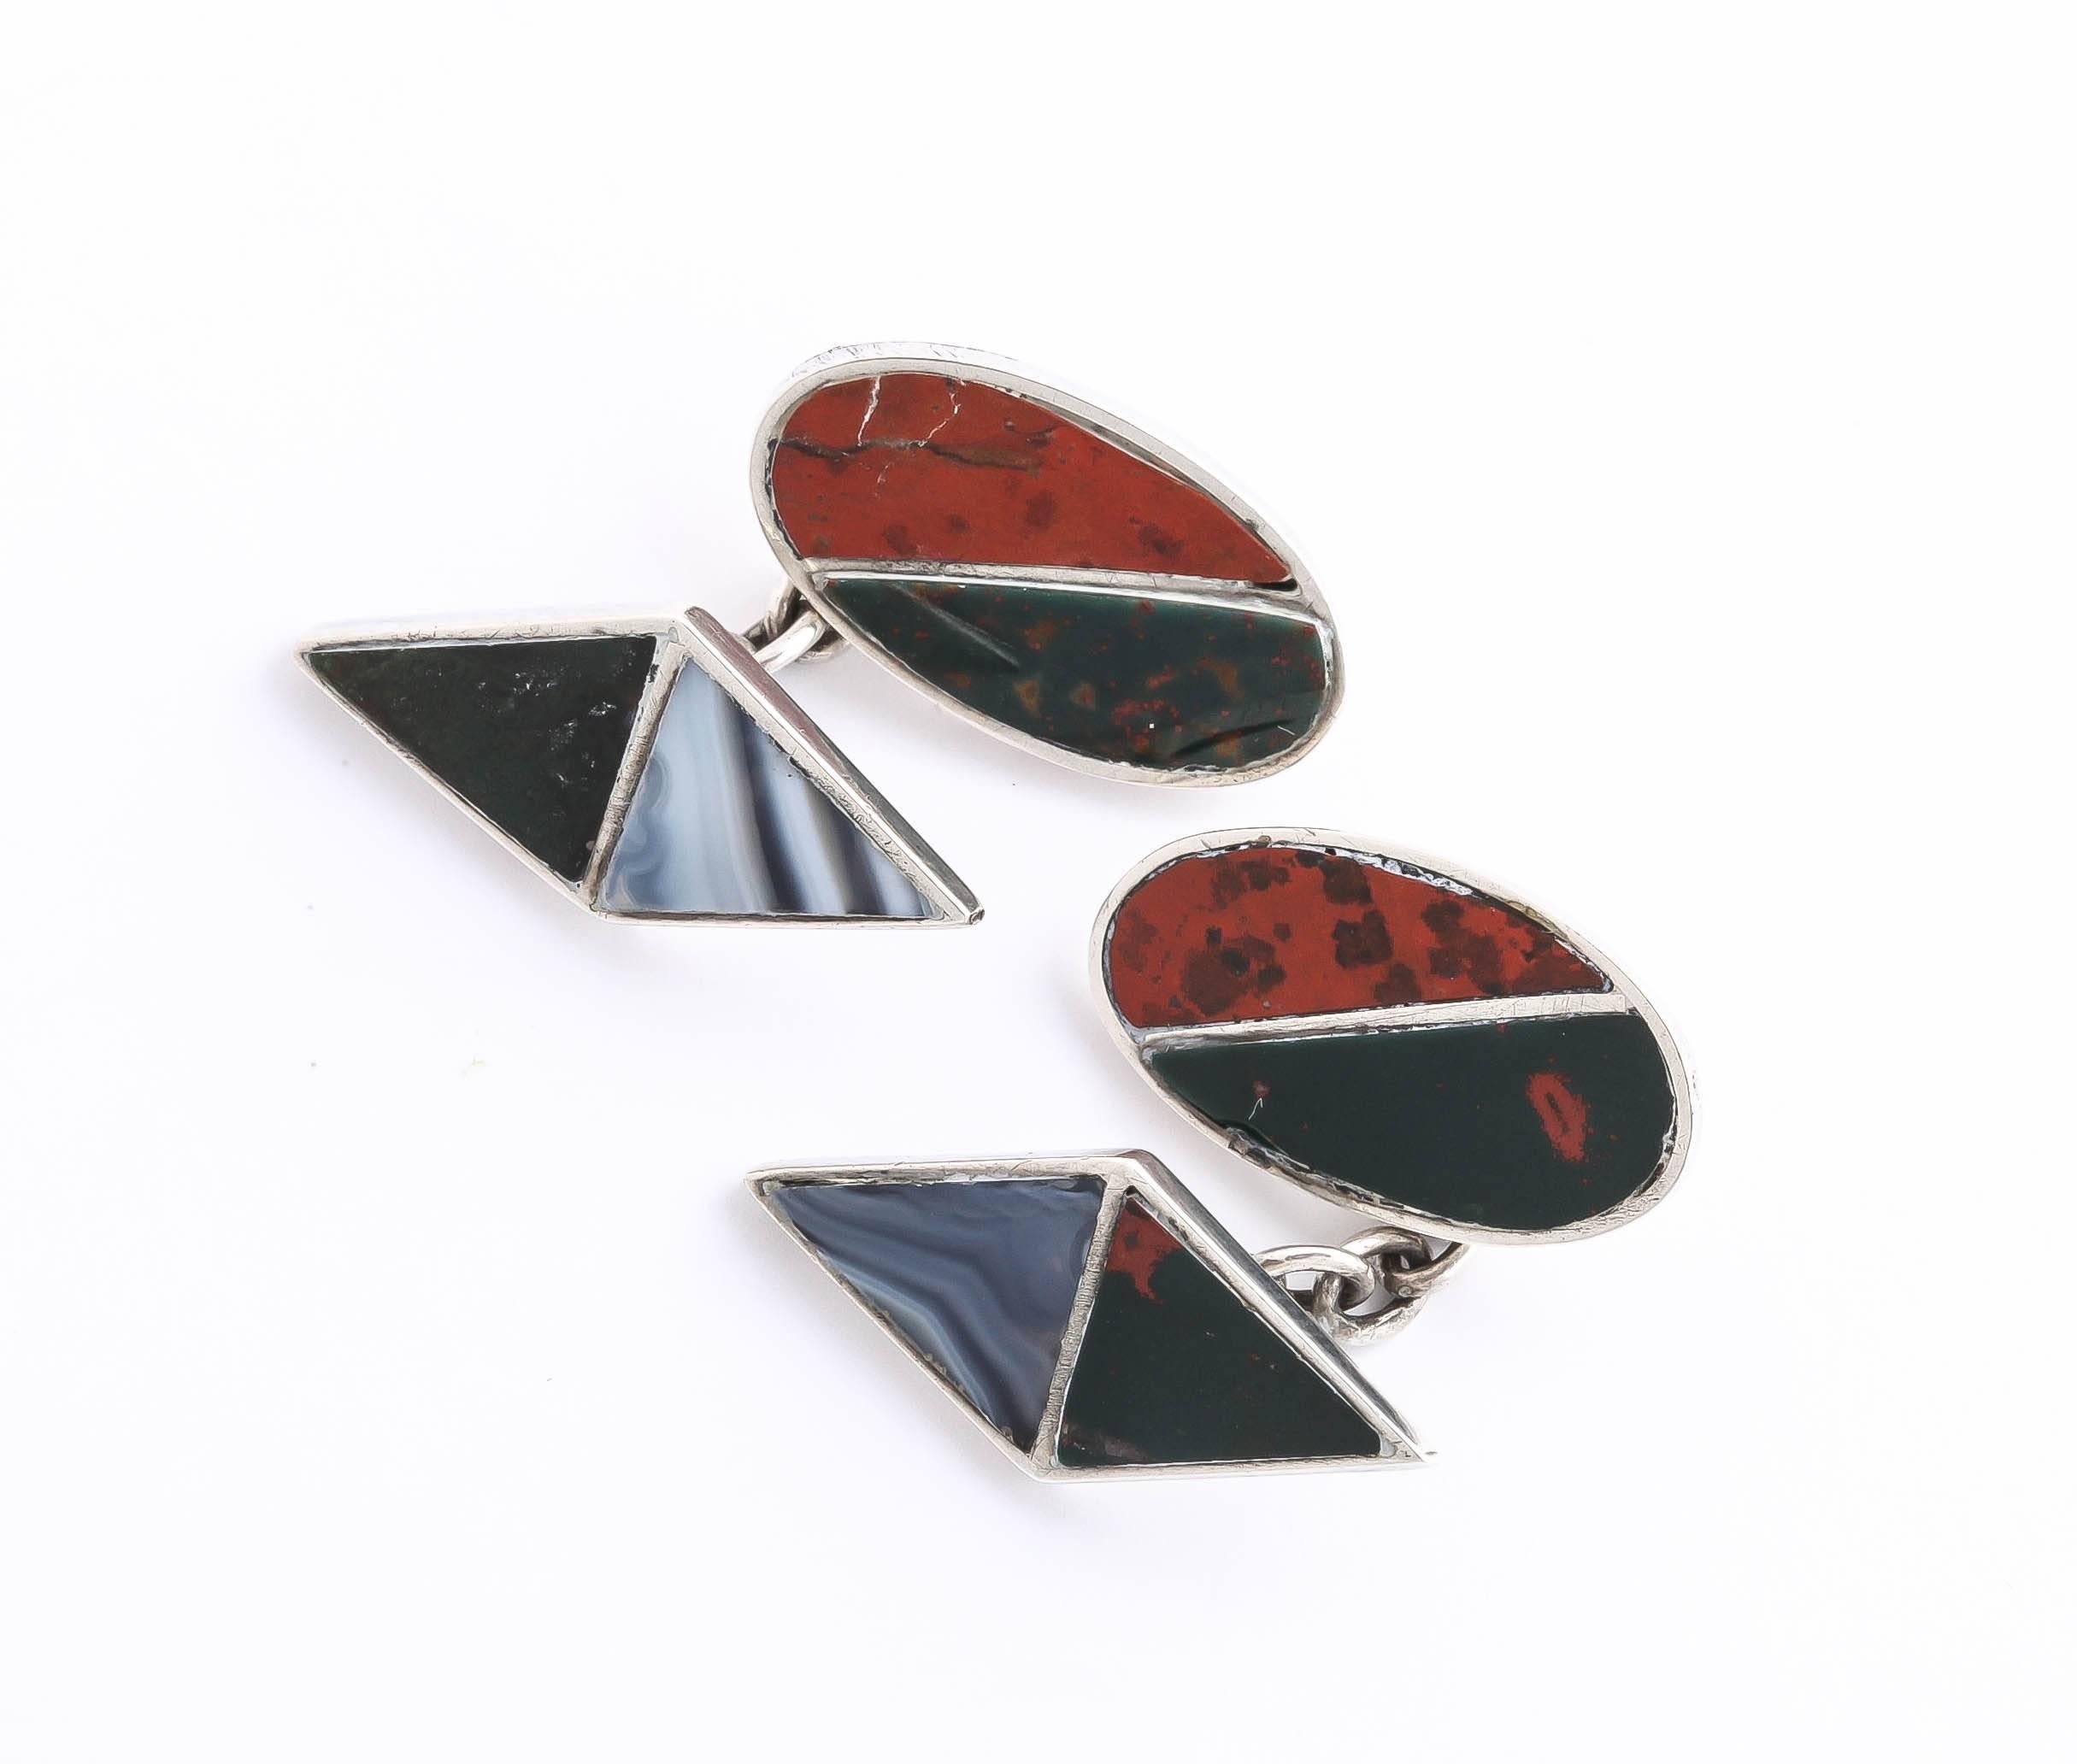 One side is oval inset with Jasper and Bloodstone and the other is a diamond shape inset with Chalcedonyx and Black Onyx.

Impressed for 925 silver/ Birmingham/ 1929/ J C & S.